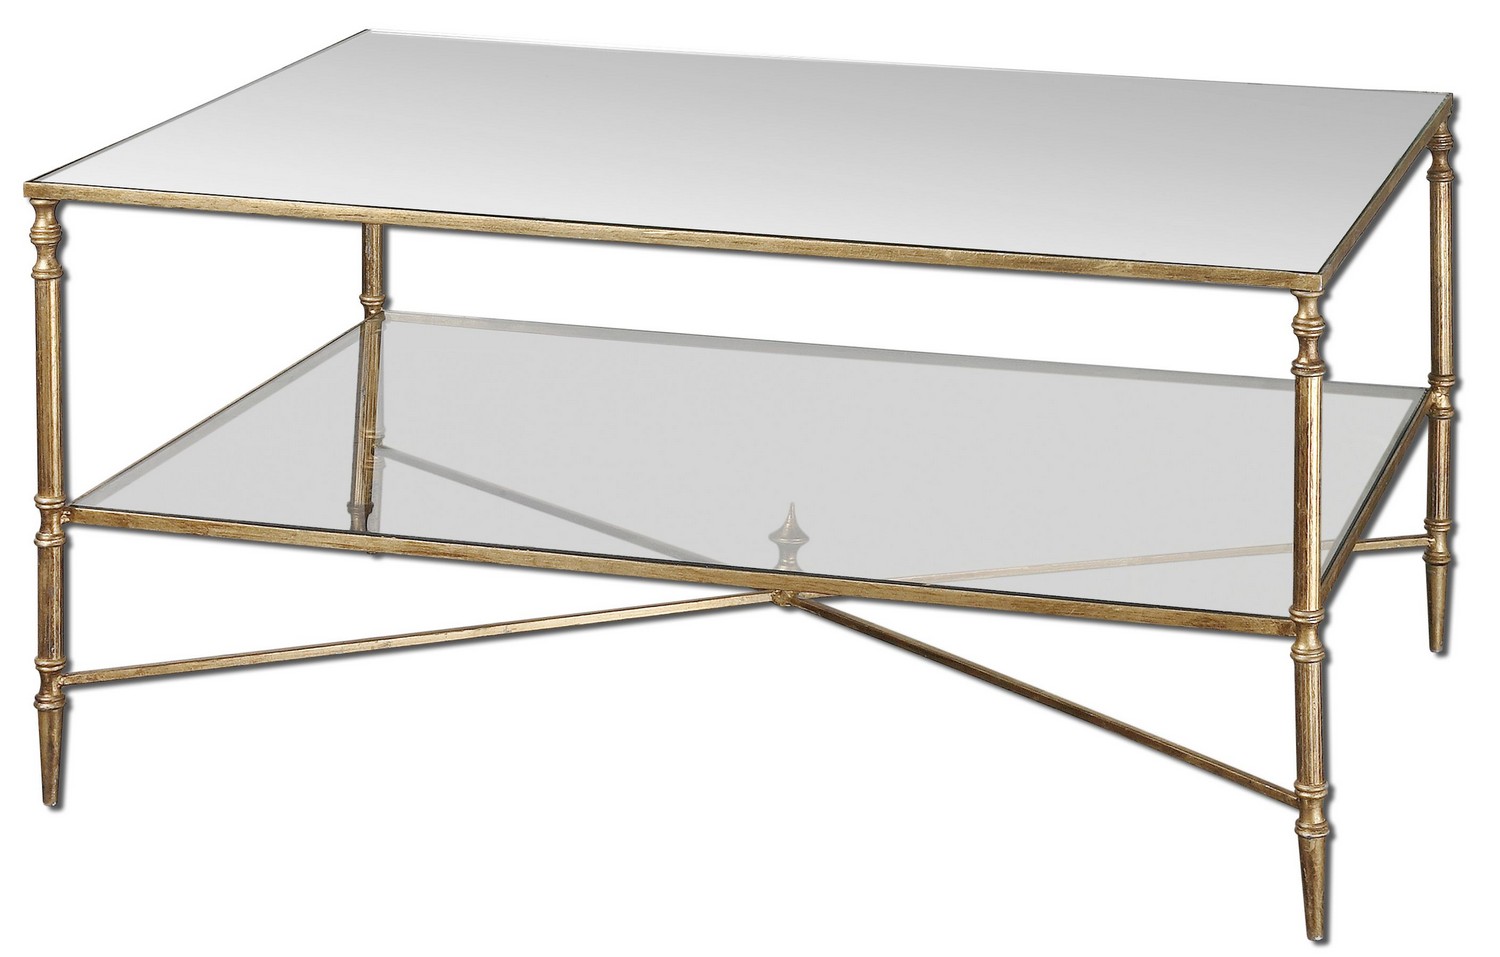 Uttermost Henzler Mirrored Glass Coffee Table